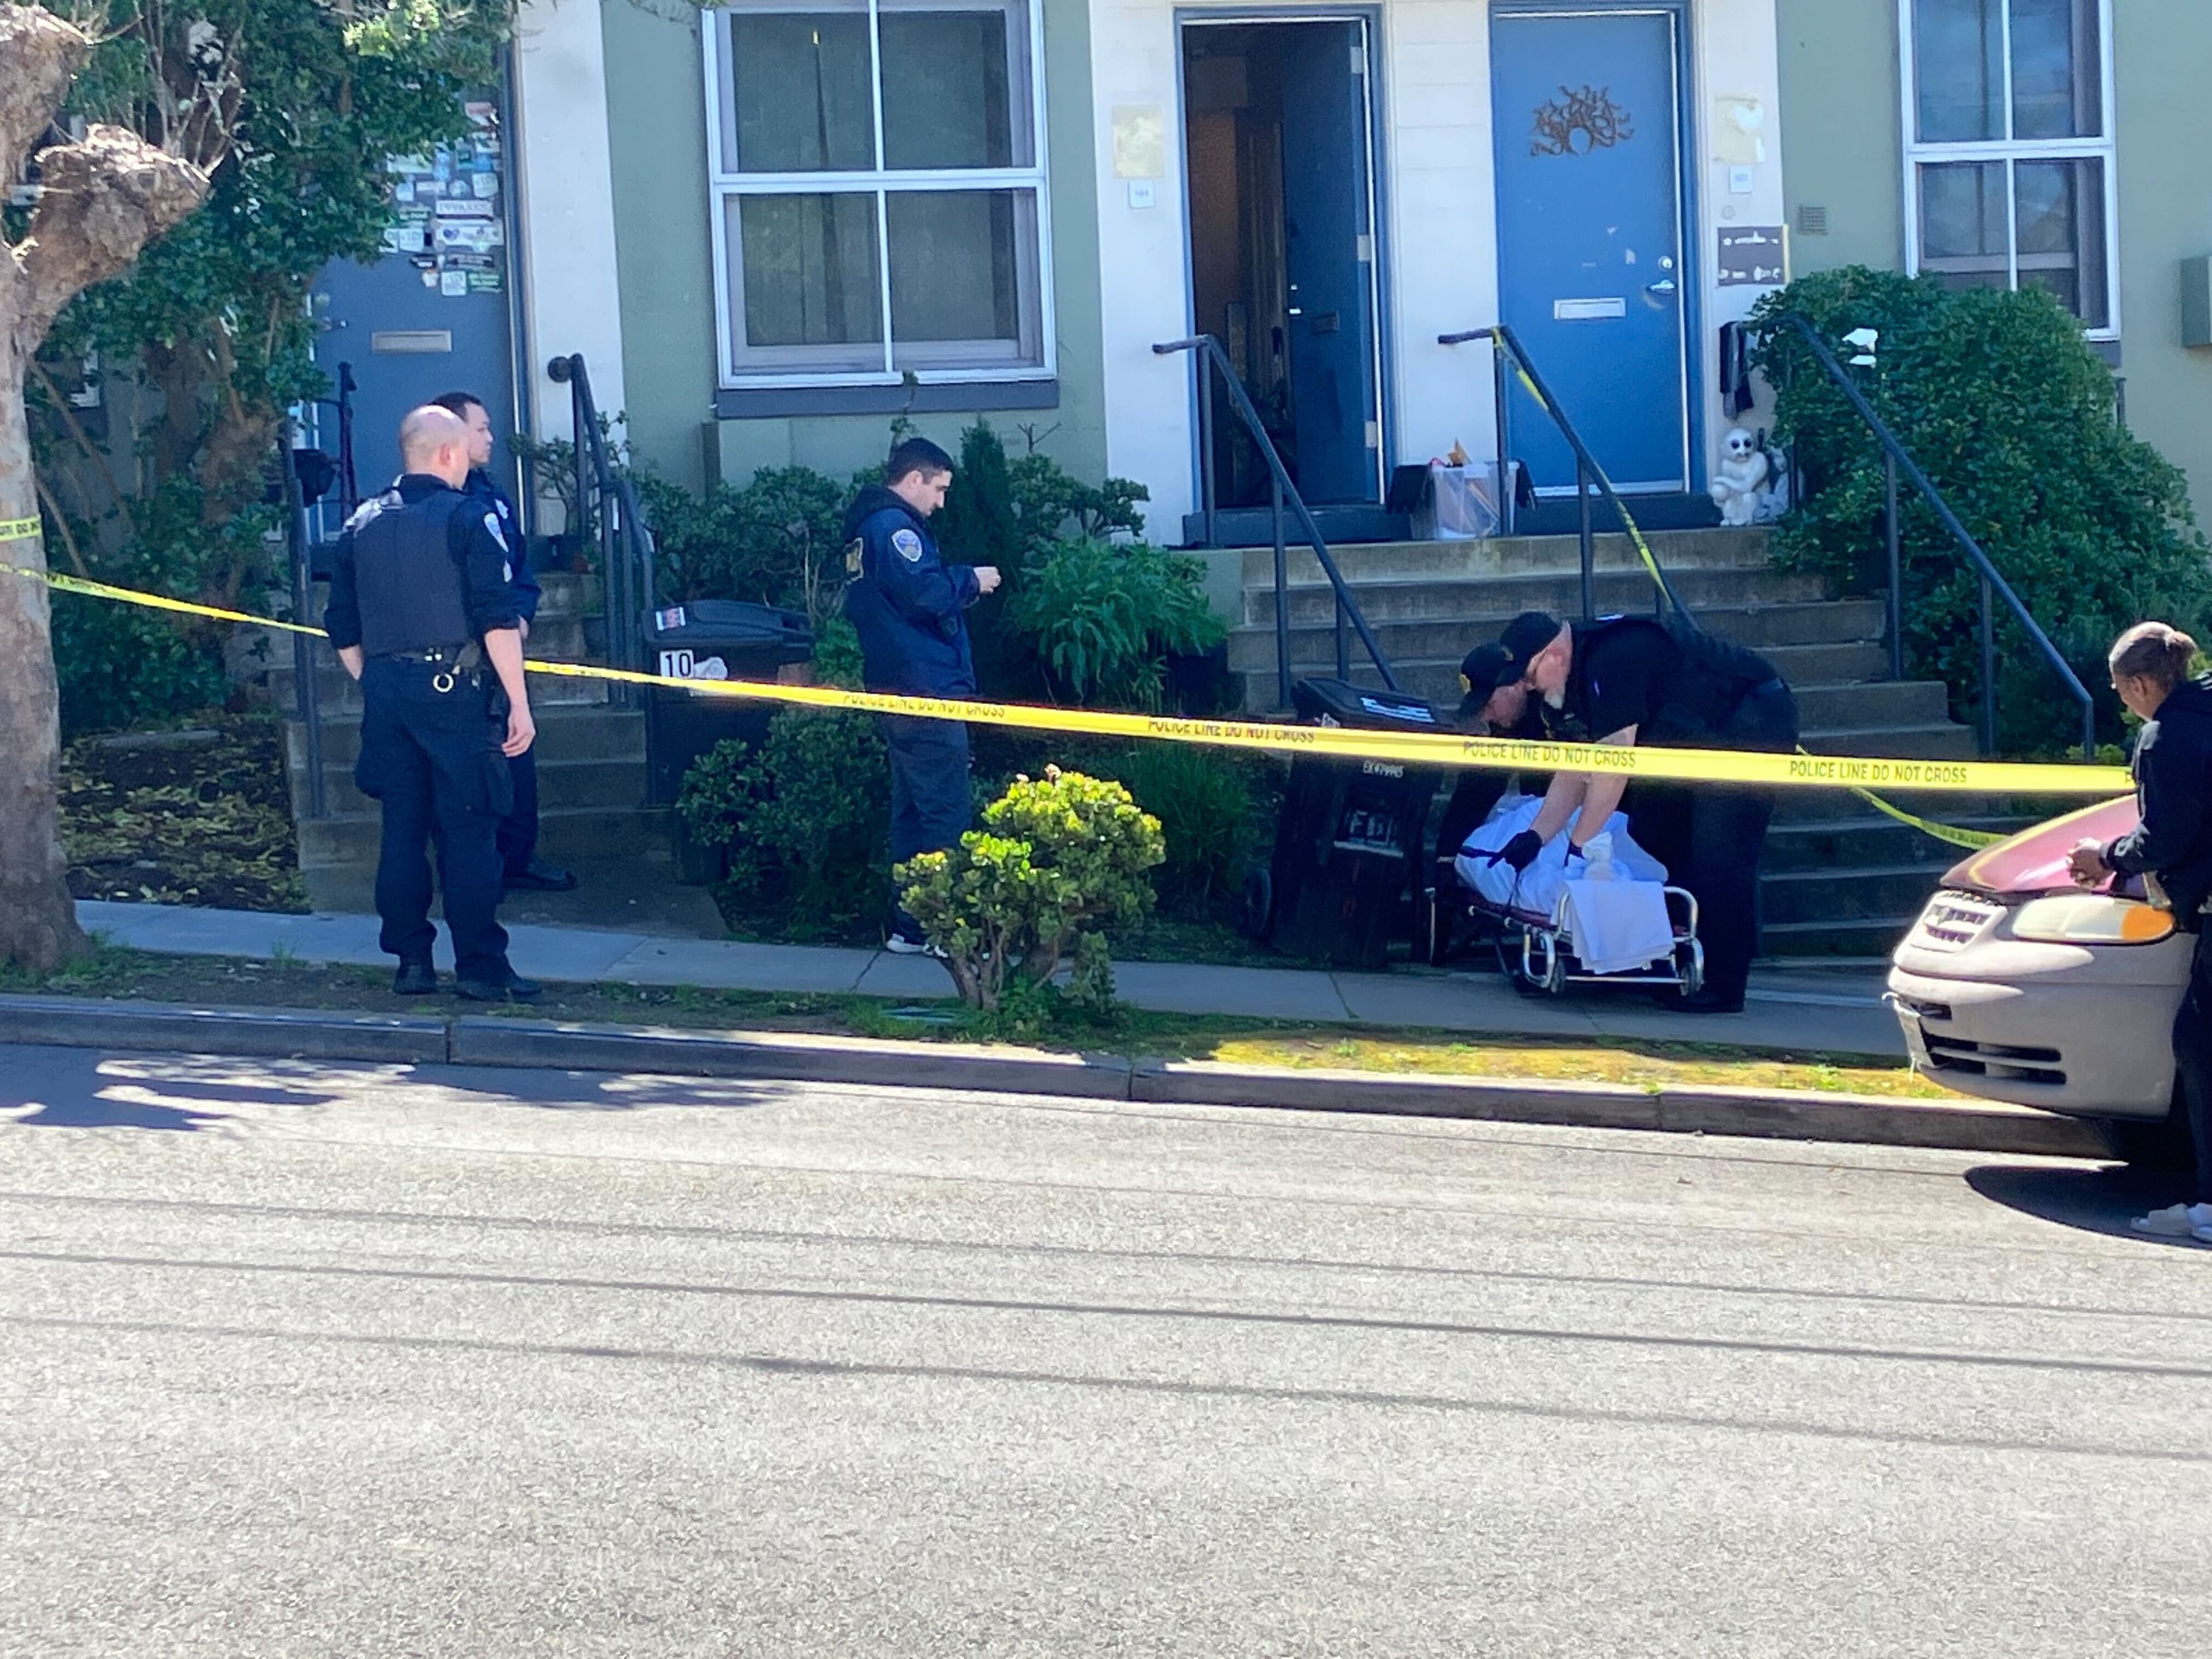 Police officers and taped-off scene with a dog watching from a doorway.